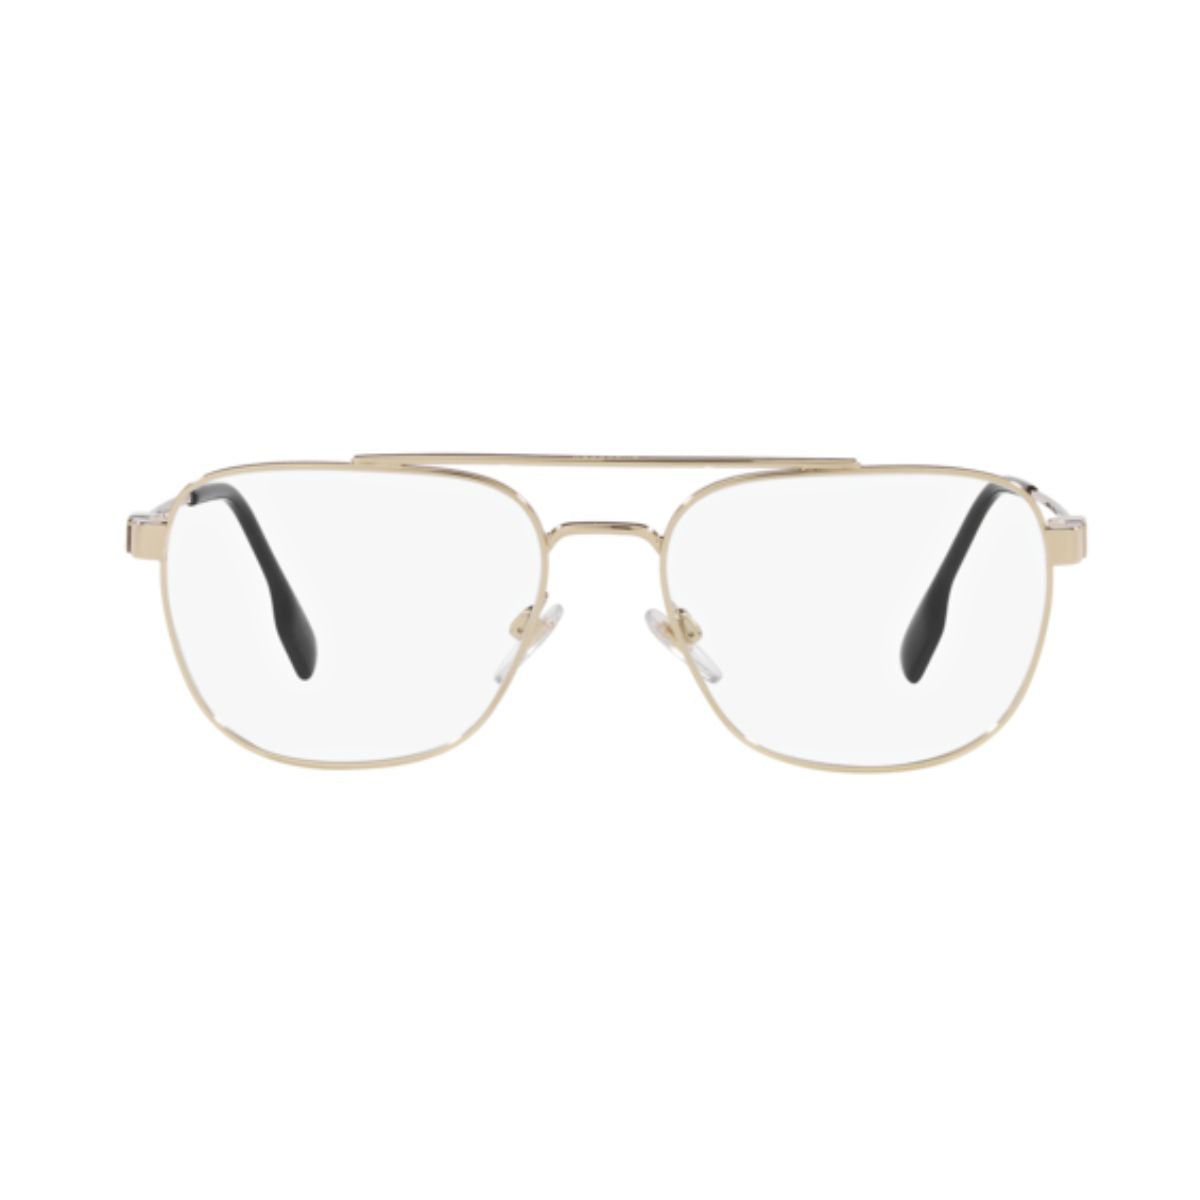 "buy burberry 1377 1109 spectacle frame for mens online at optorium"